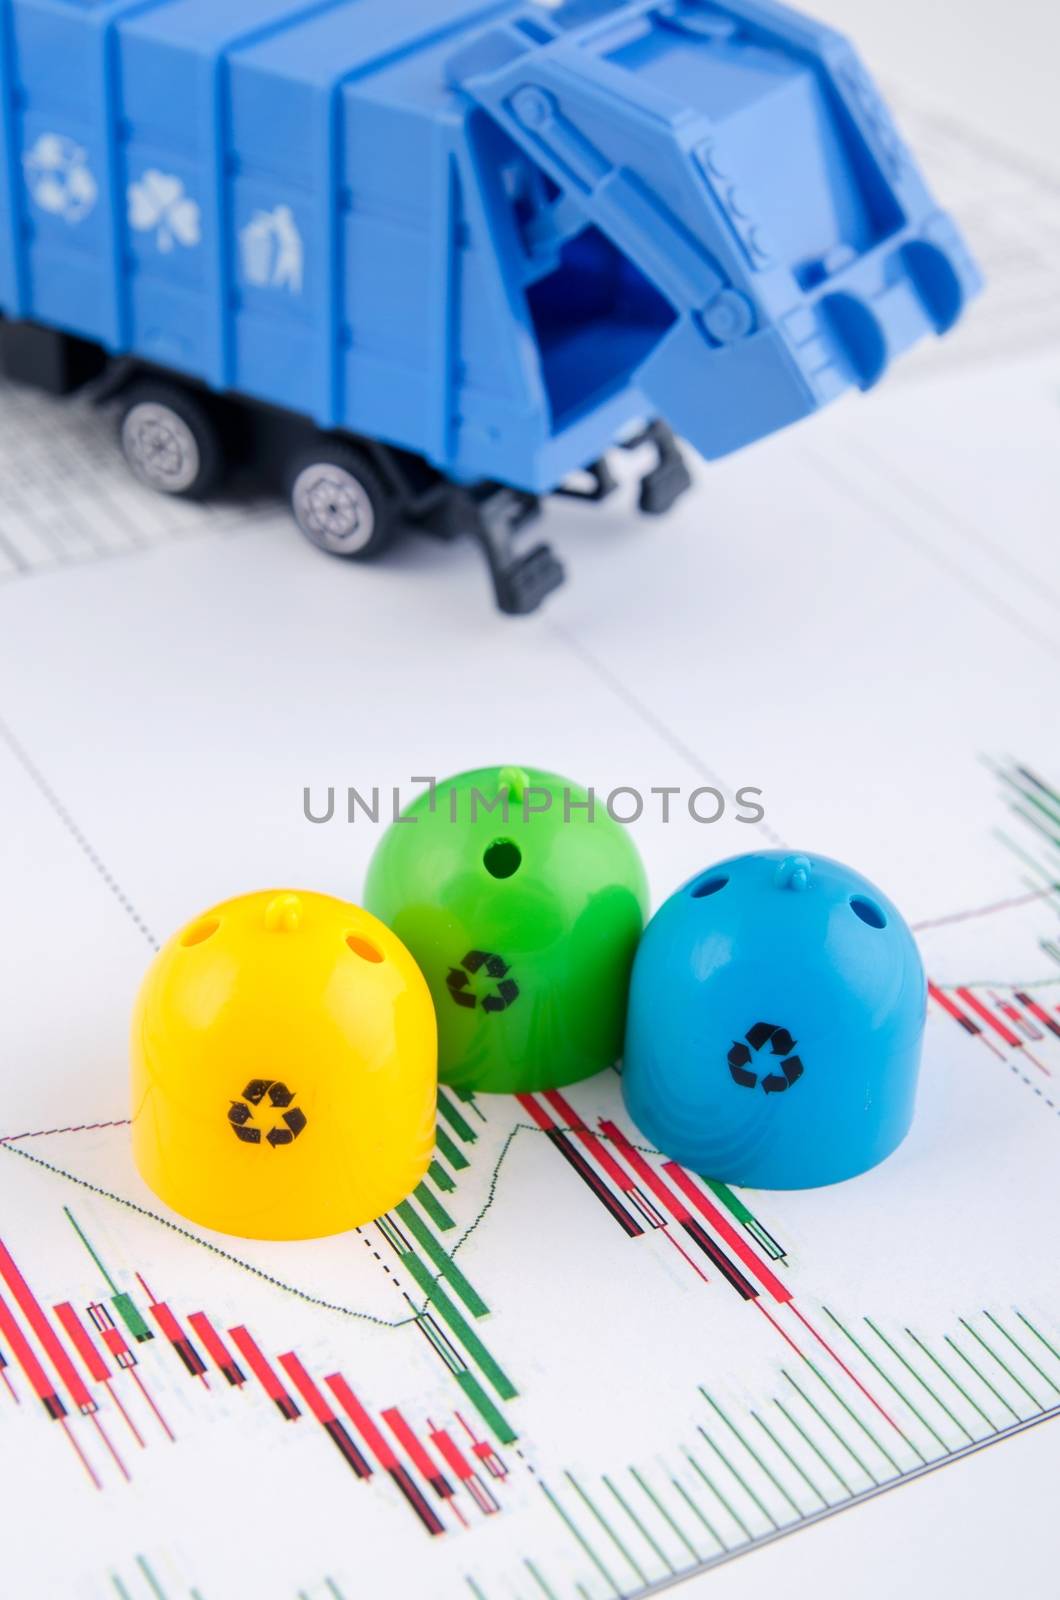 Colored trash bins and garbage truck toys on business background by simpson33